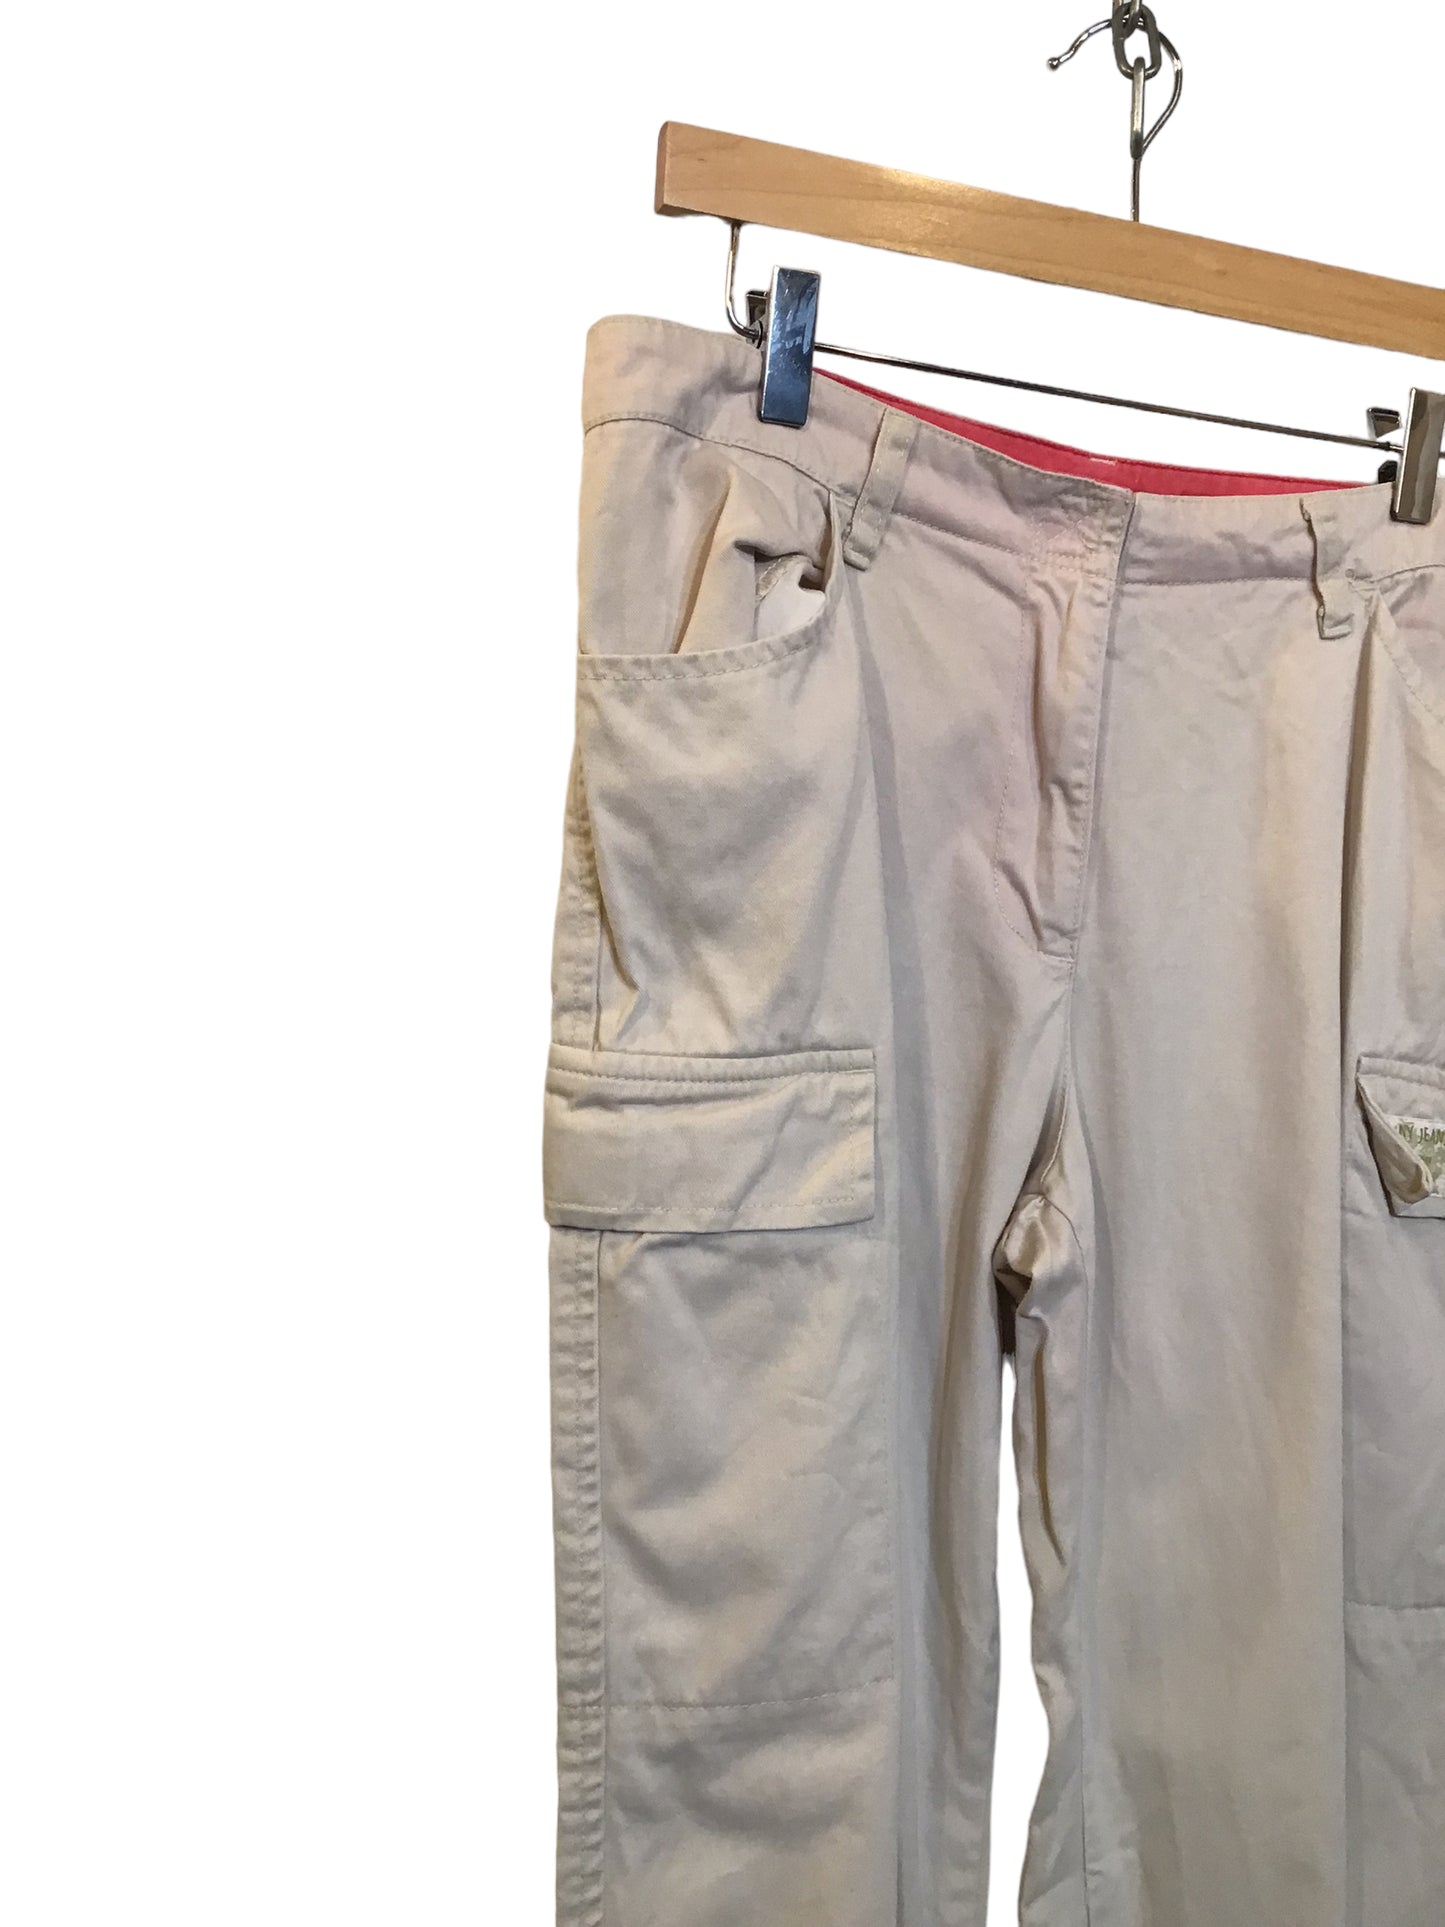 DKNY Trousers (Size S)